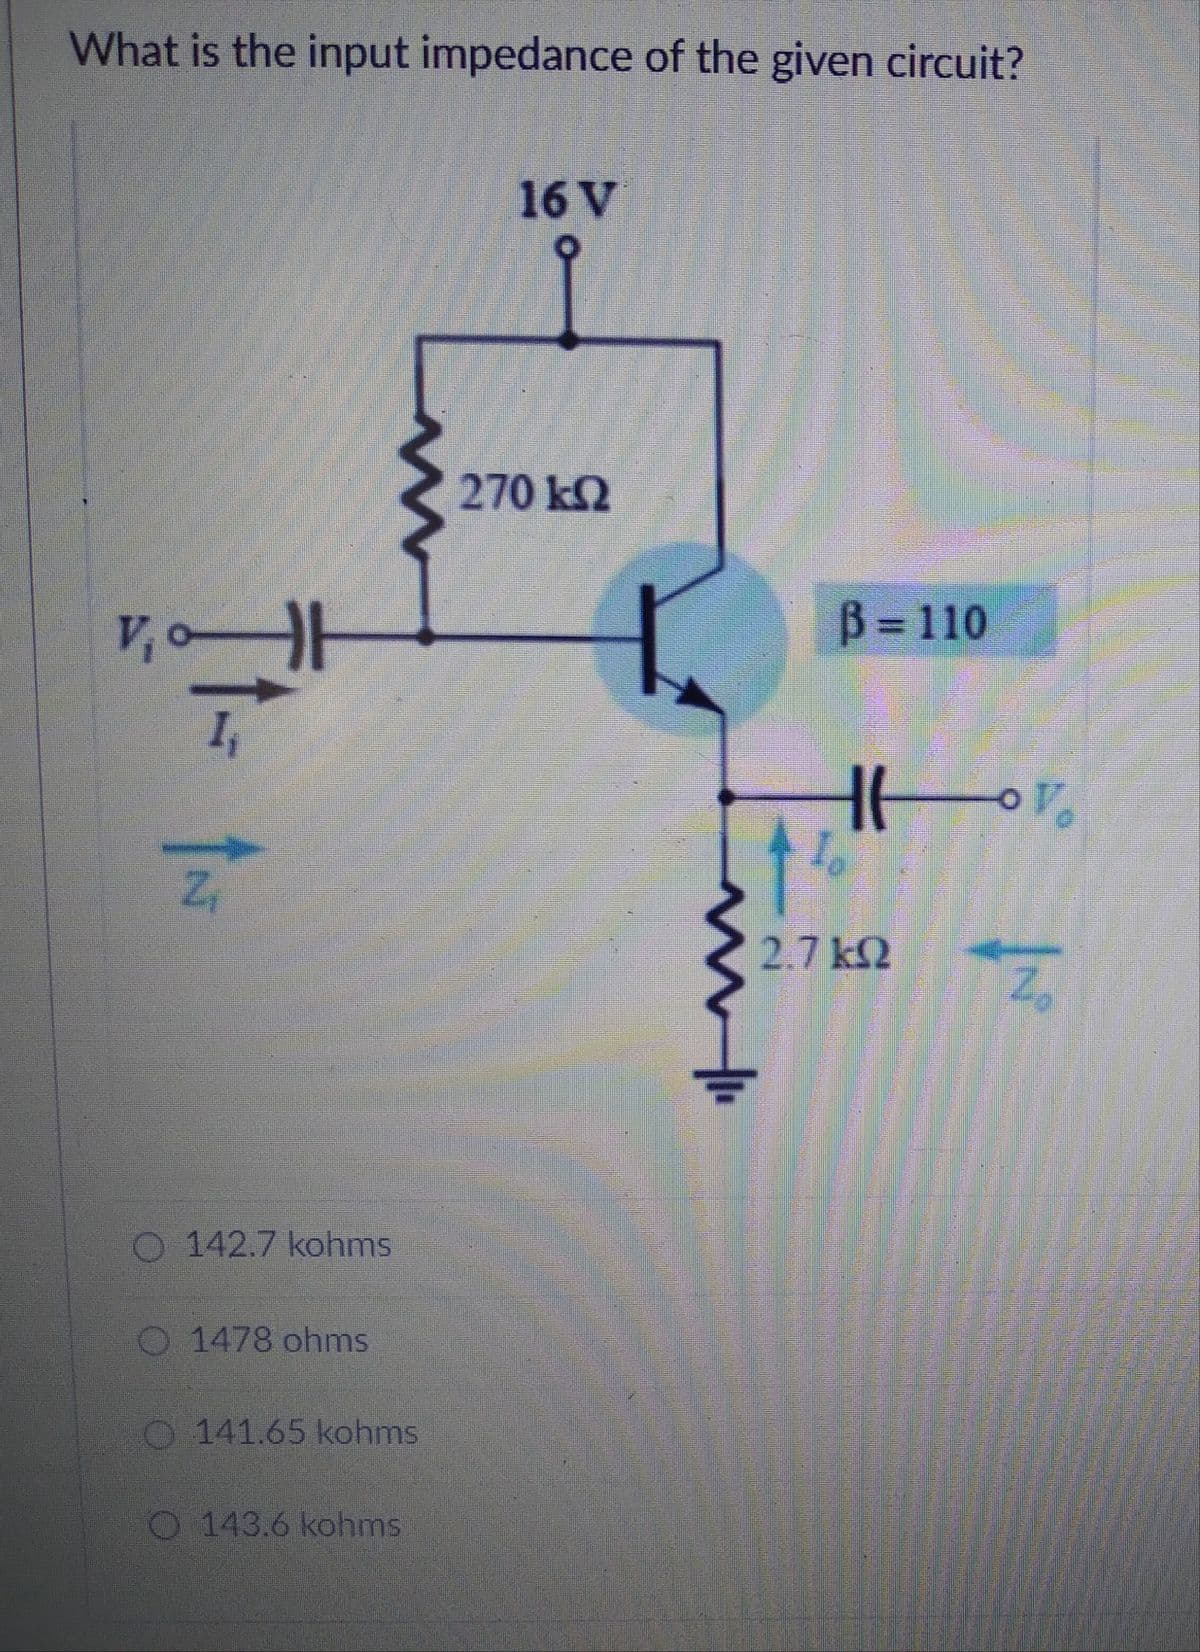 What is the input impedance of the given circuit?
16 V
270 kN
B D110
I,
2.7 k2
142.7 kohms
O 1478 ohms
O 141.65 kohms
O 143.6 kohms
2,
